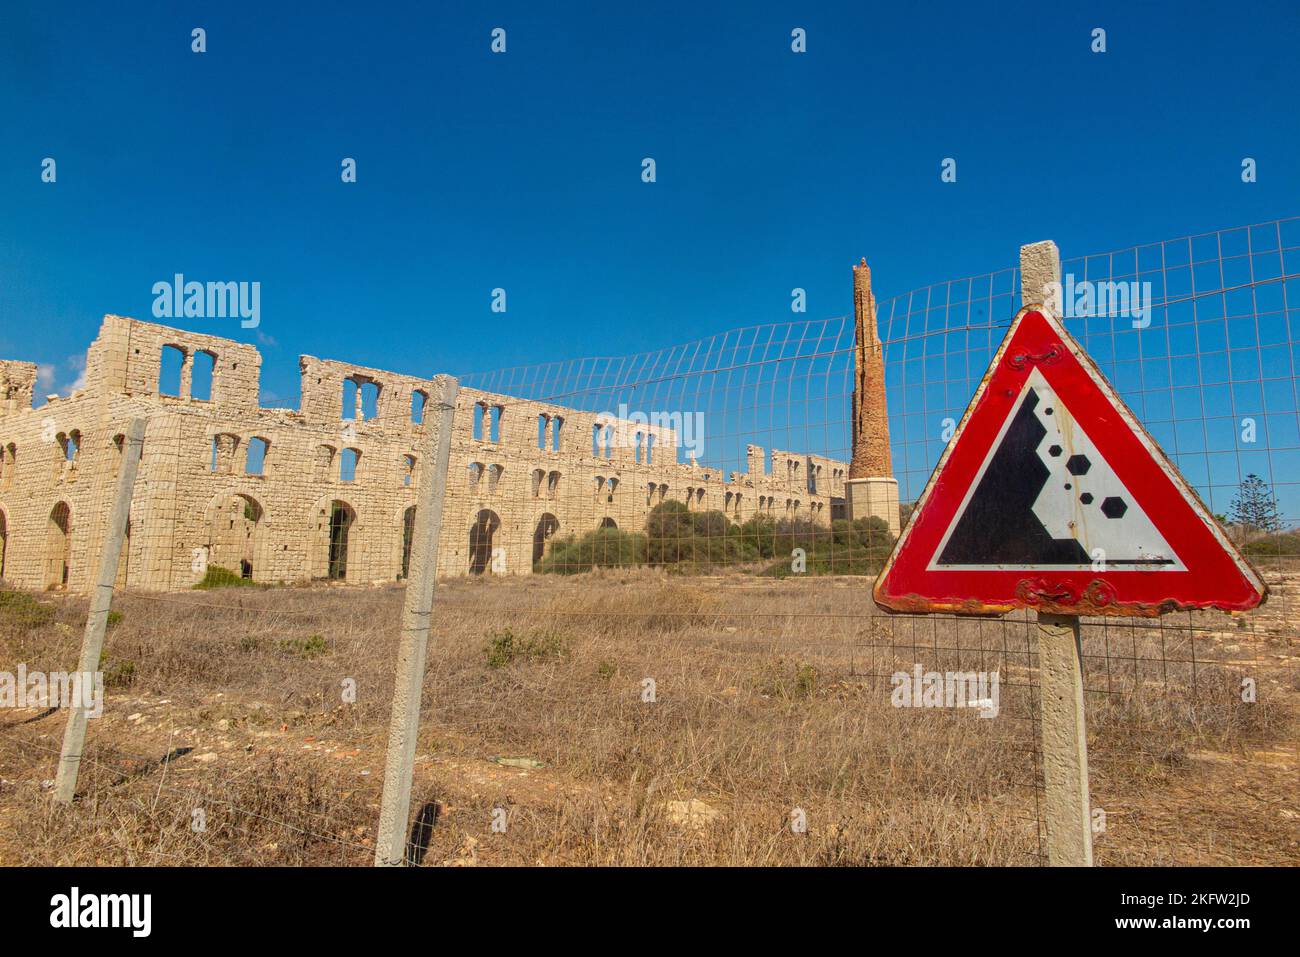 Fornace Penna, a deserted brick factory near Marina di Modica Sicily, Italy with a triangular warning sign of danger Stock Photo